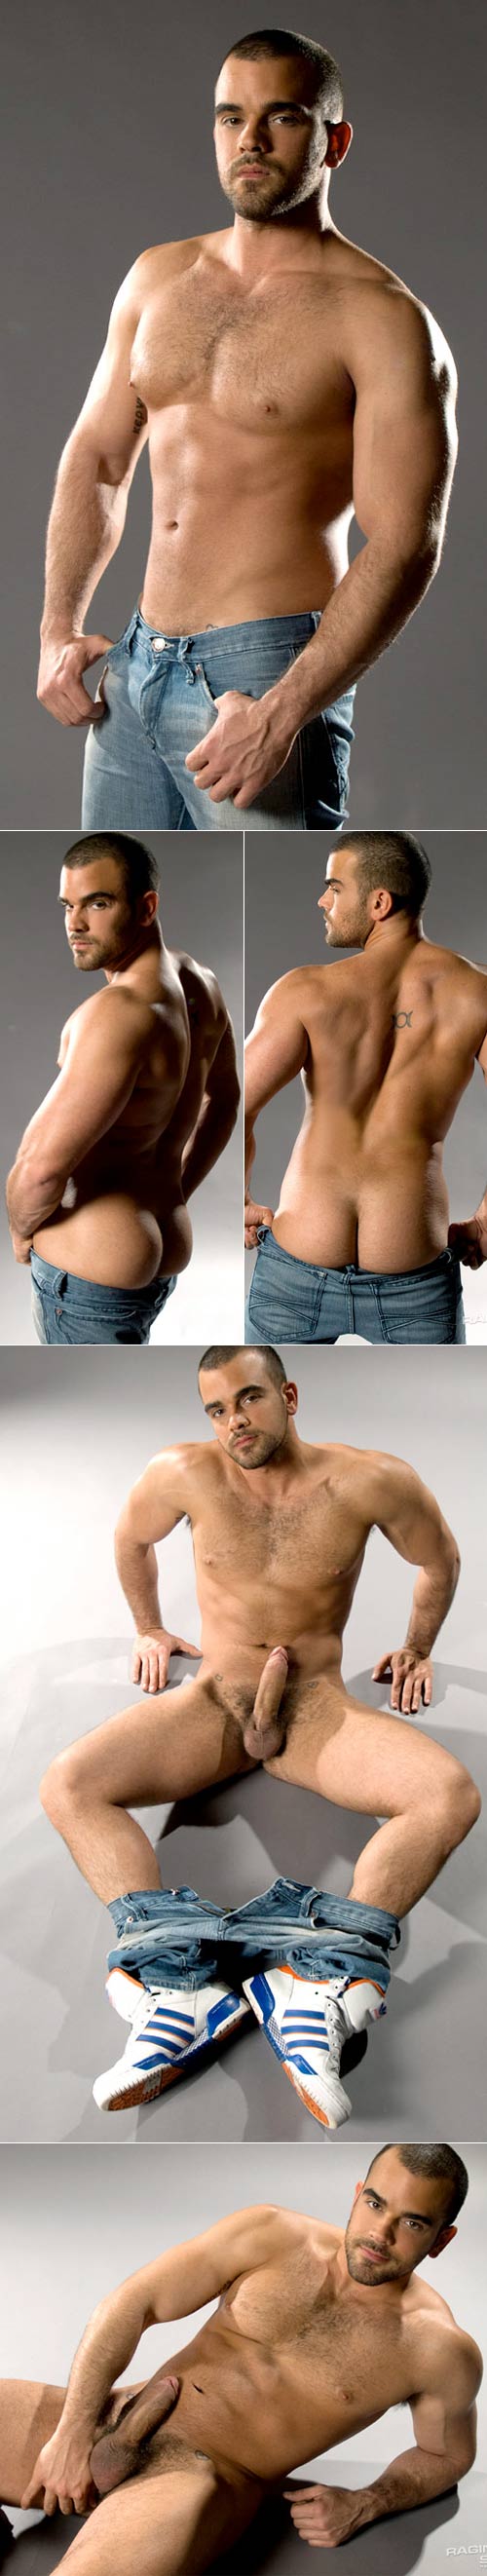 Damien Crosse (Set 2) at The Rear Stable